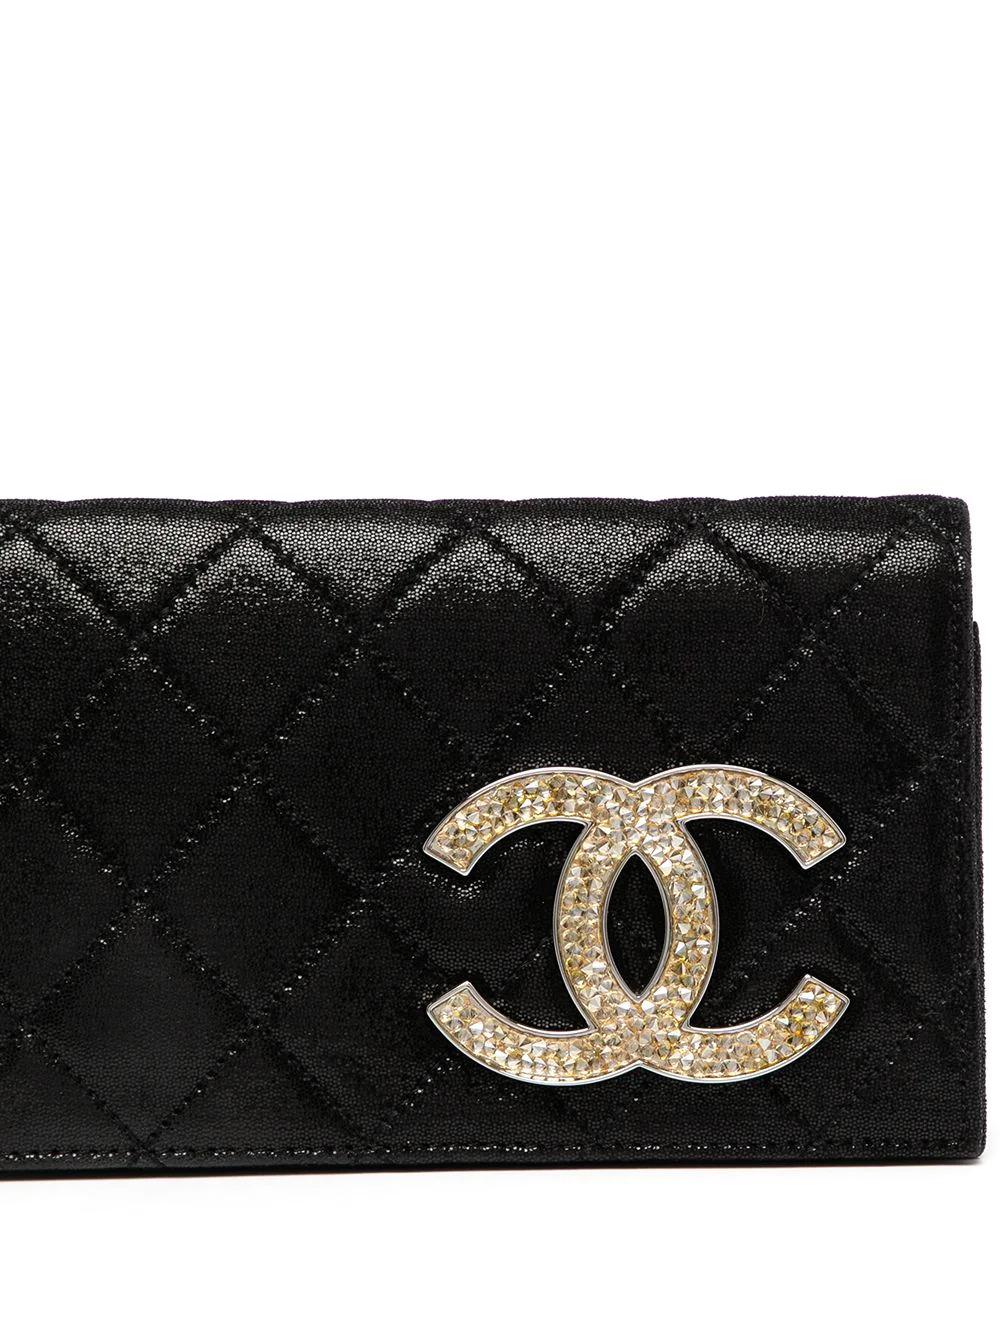 A classy pre-owned clutch from Chanel featuring a shiny black exterior with a gold-toned signature interlocking CC detail. The perfect addition to an evening outfit!

Measurements: Height 1.76 m, Bust/Chest 82 cm, Hips 89 cm, Waist 60 cm

Colour: